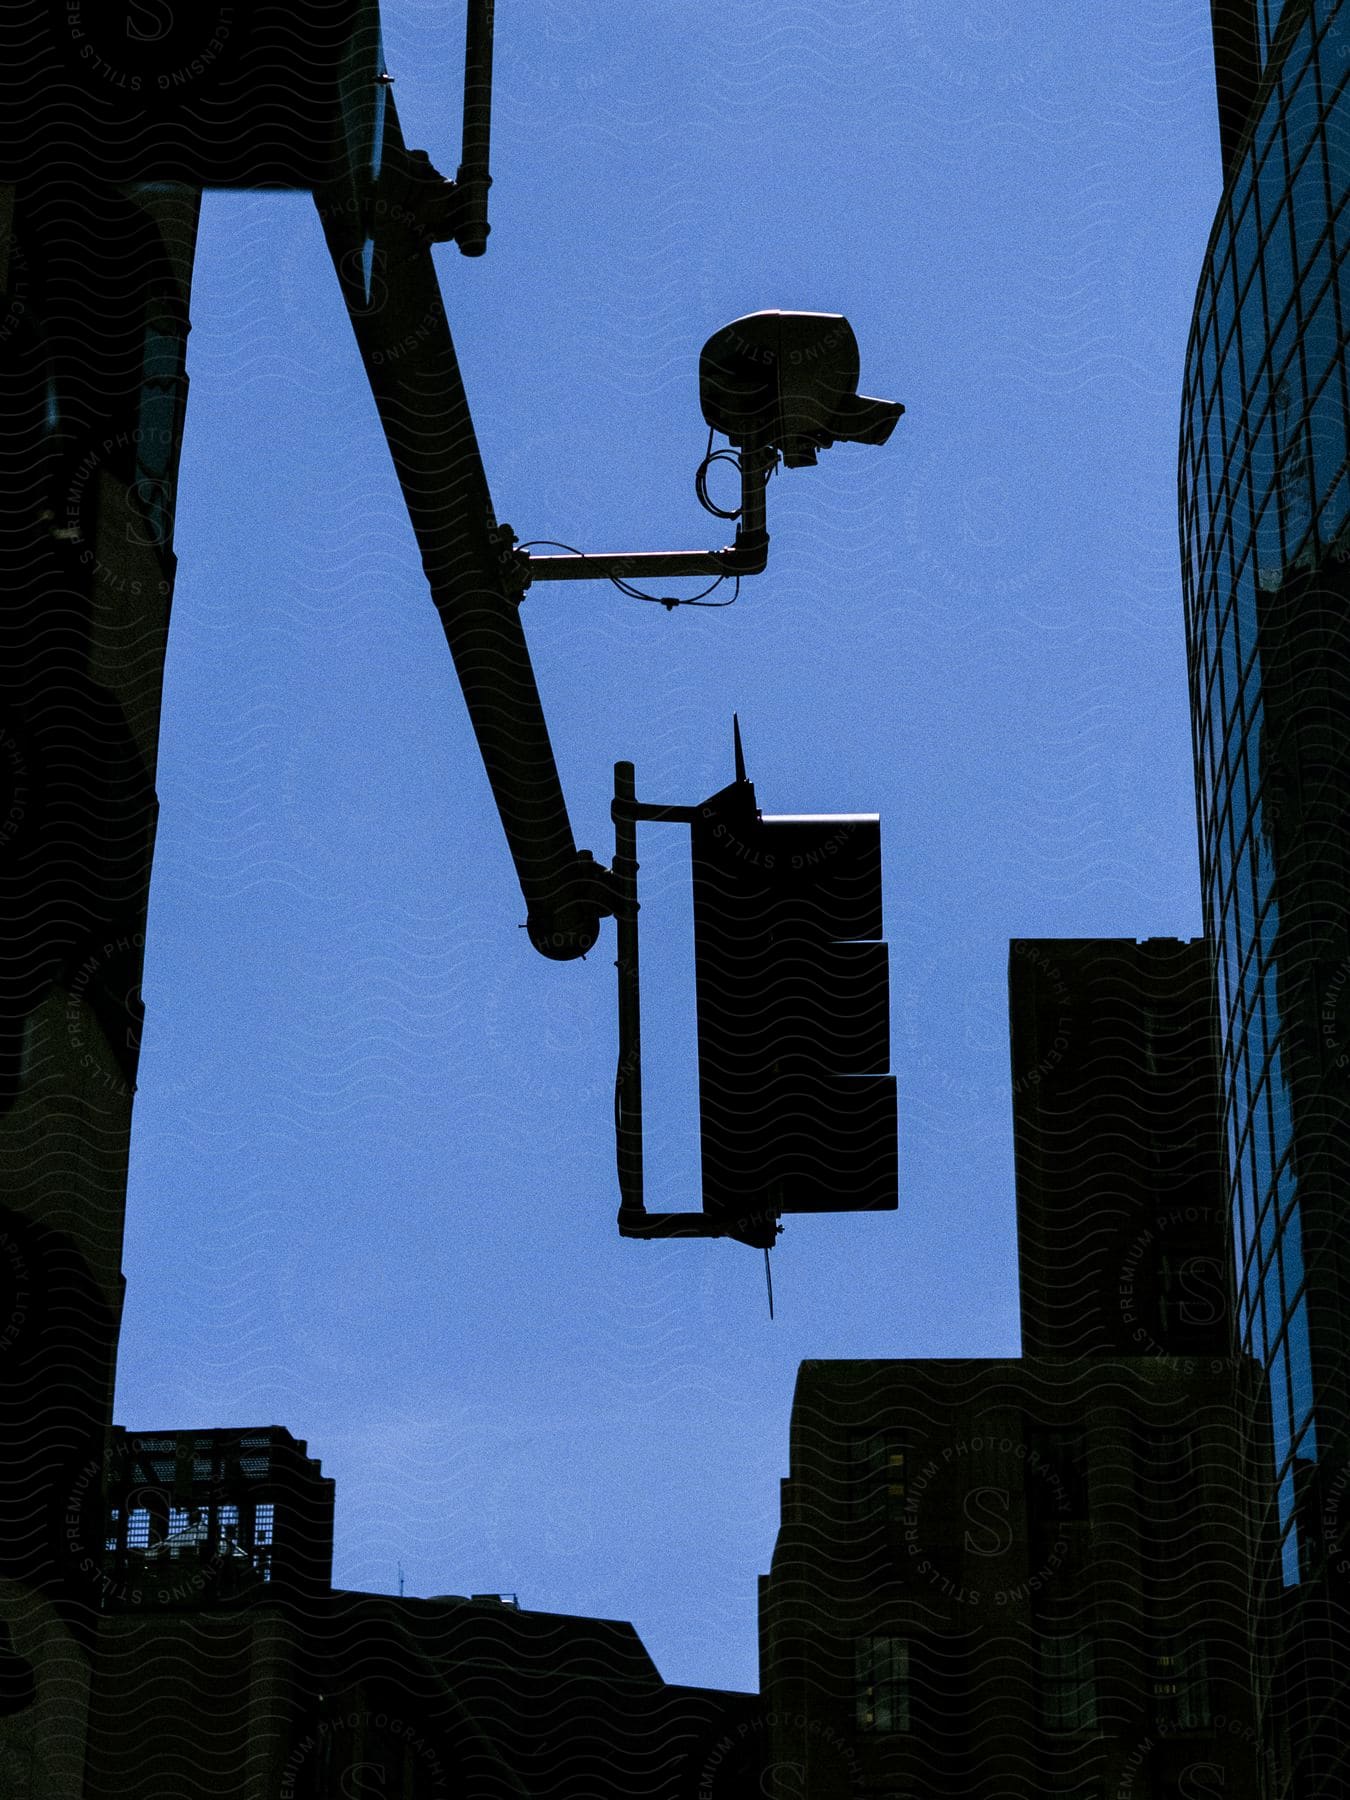 Silhouetted traffic lights against a blue sky